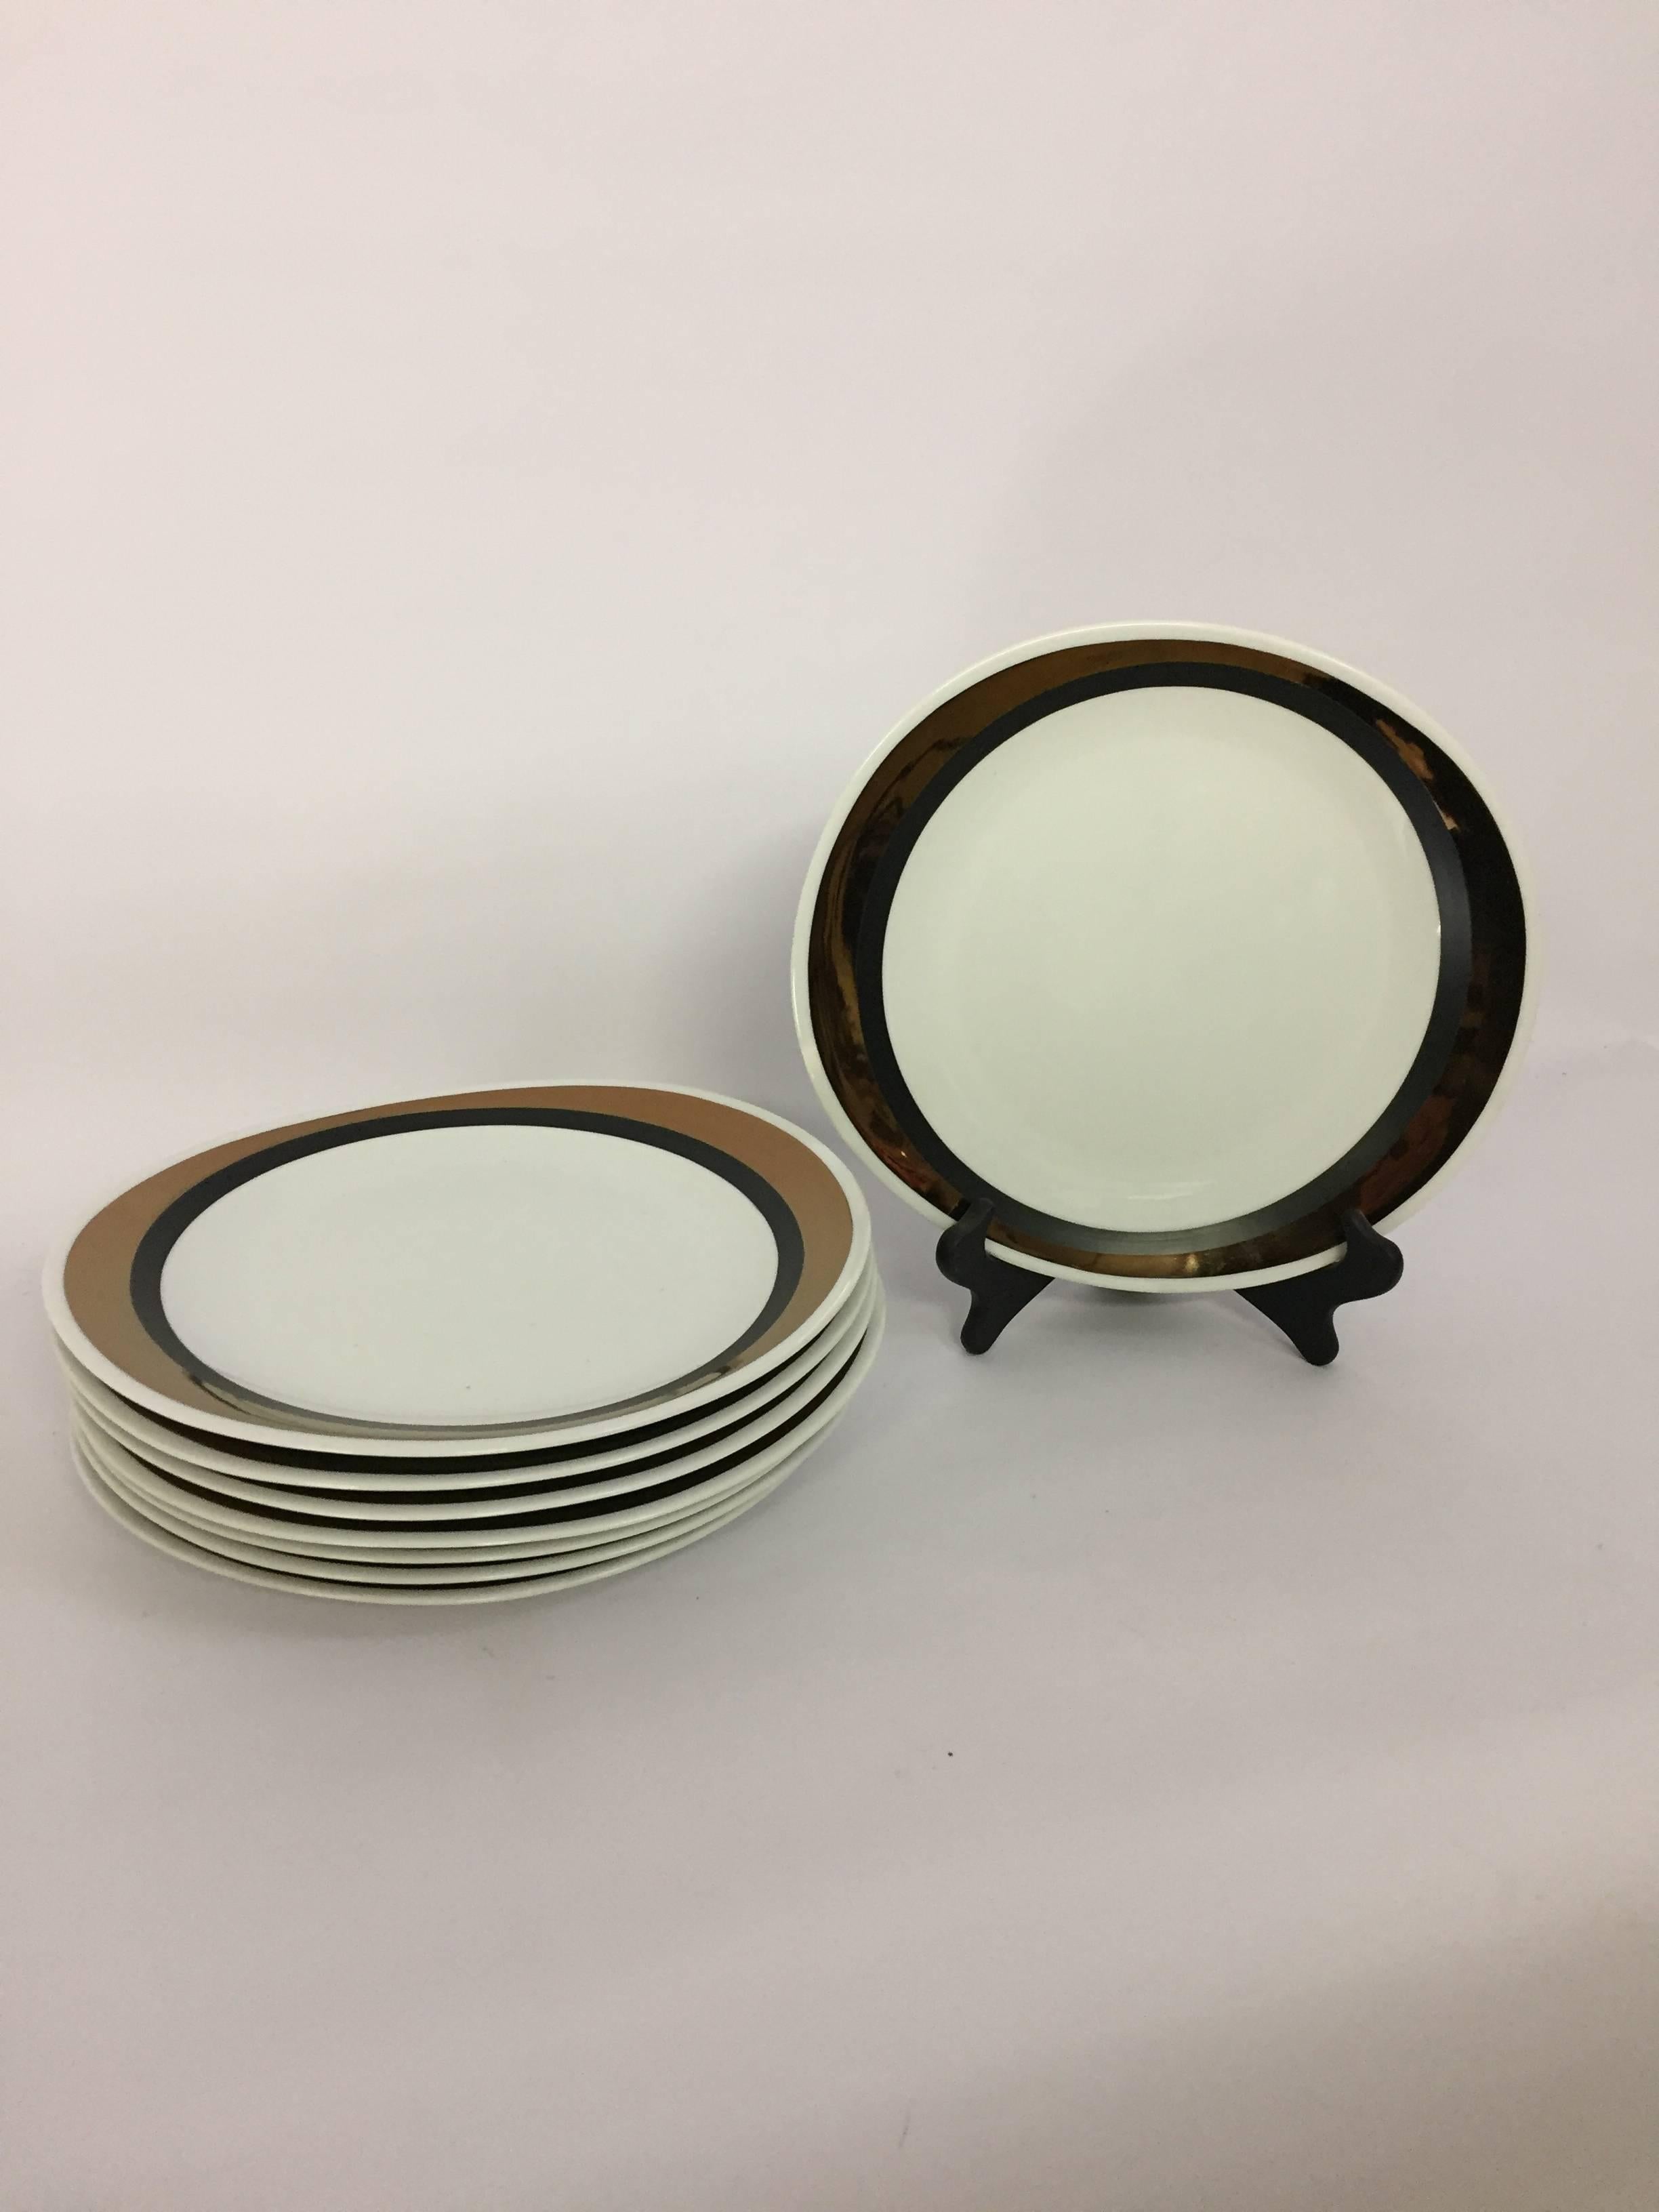 Wonderful block China Mid-Century Modern service for eight. Hand-painted black and copper lustre outer edge design. Fully signed on bottom block, Bidasoa, Spain, Creation, Horizons, hand-painted. Each plate retains its original plastic bag for